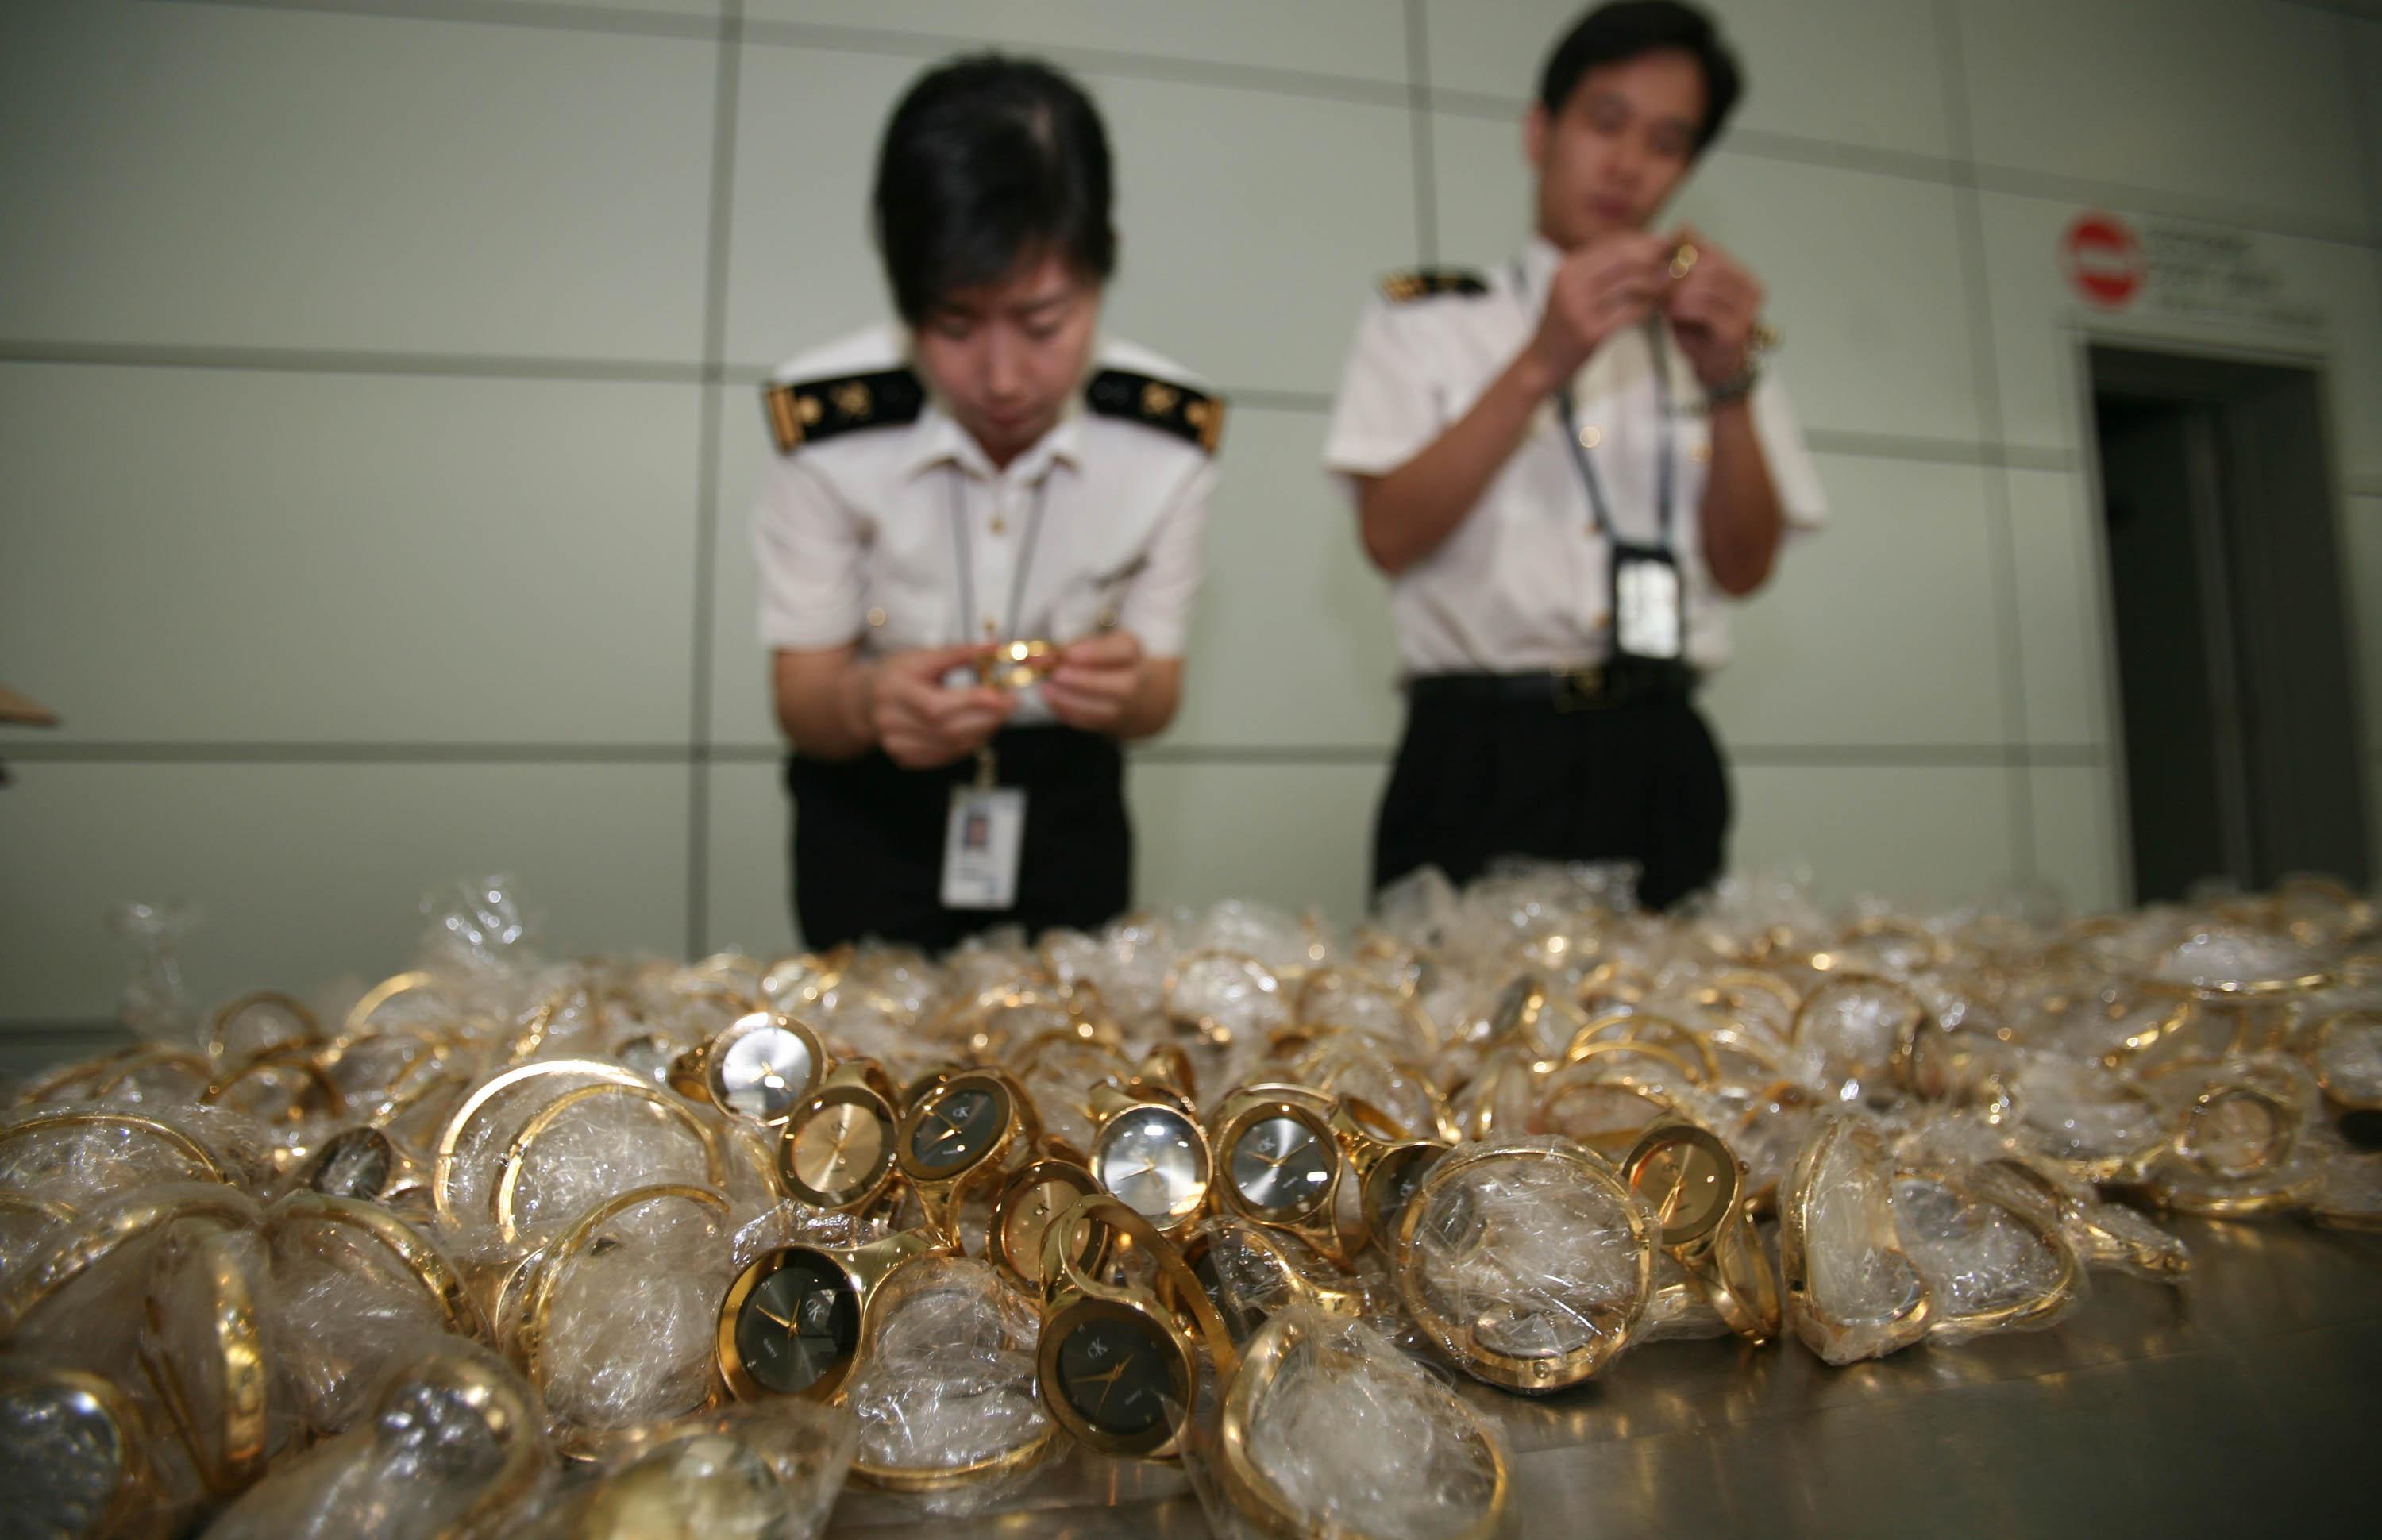 Guangzhou Baiyun Airport Customs House Intercepted and Captured 480 Watches Suspected of Infringing on    CK    through Passenger Inspection